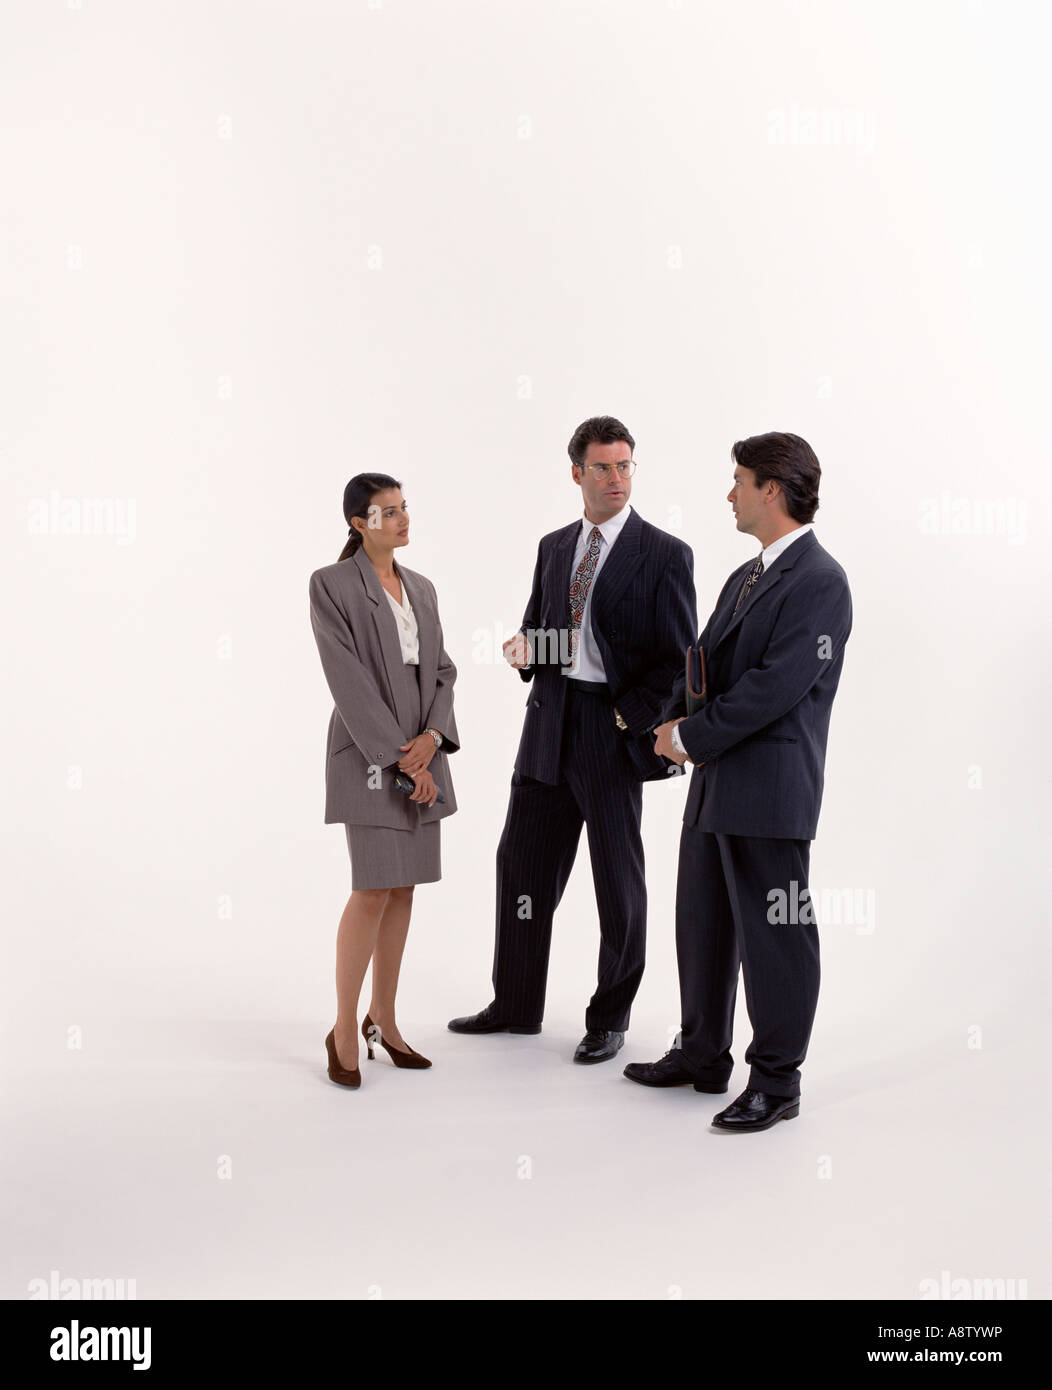 Group of three young people wearing business suits standing in studio on plain white background. Stock Photo